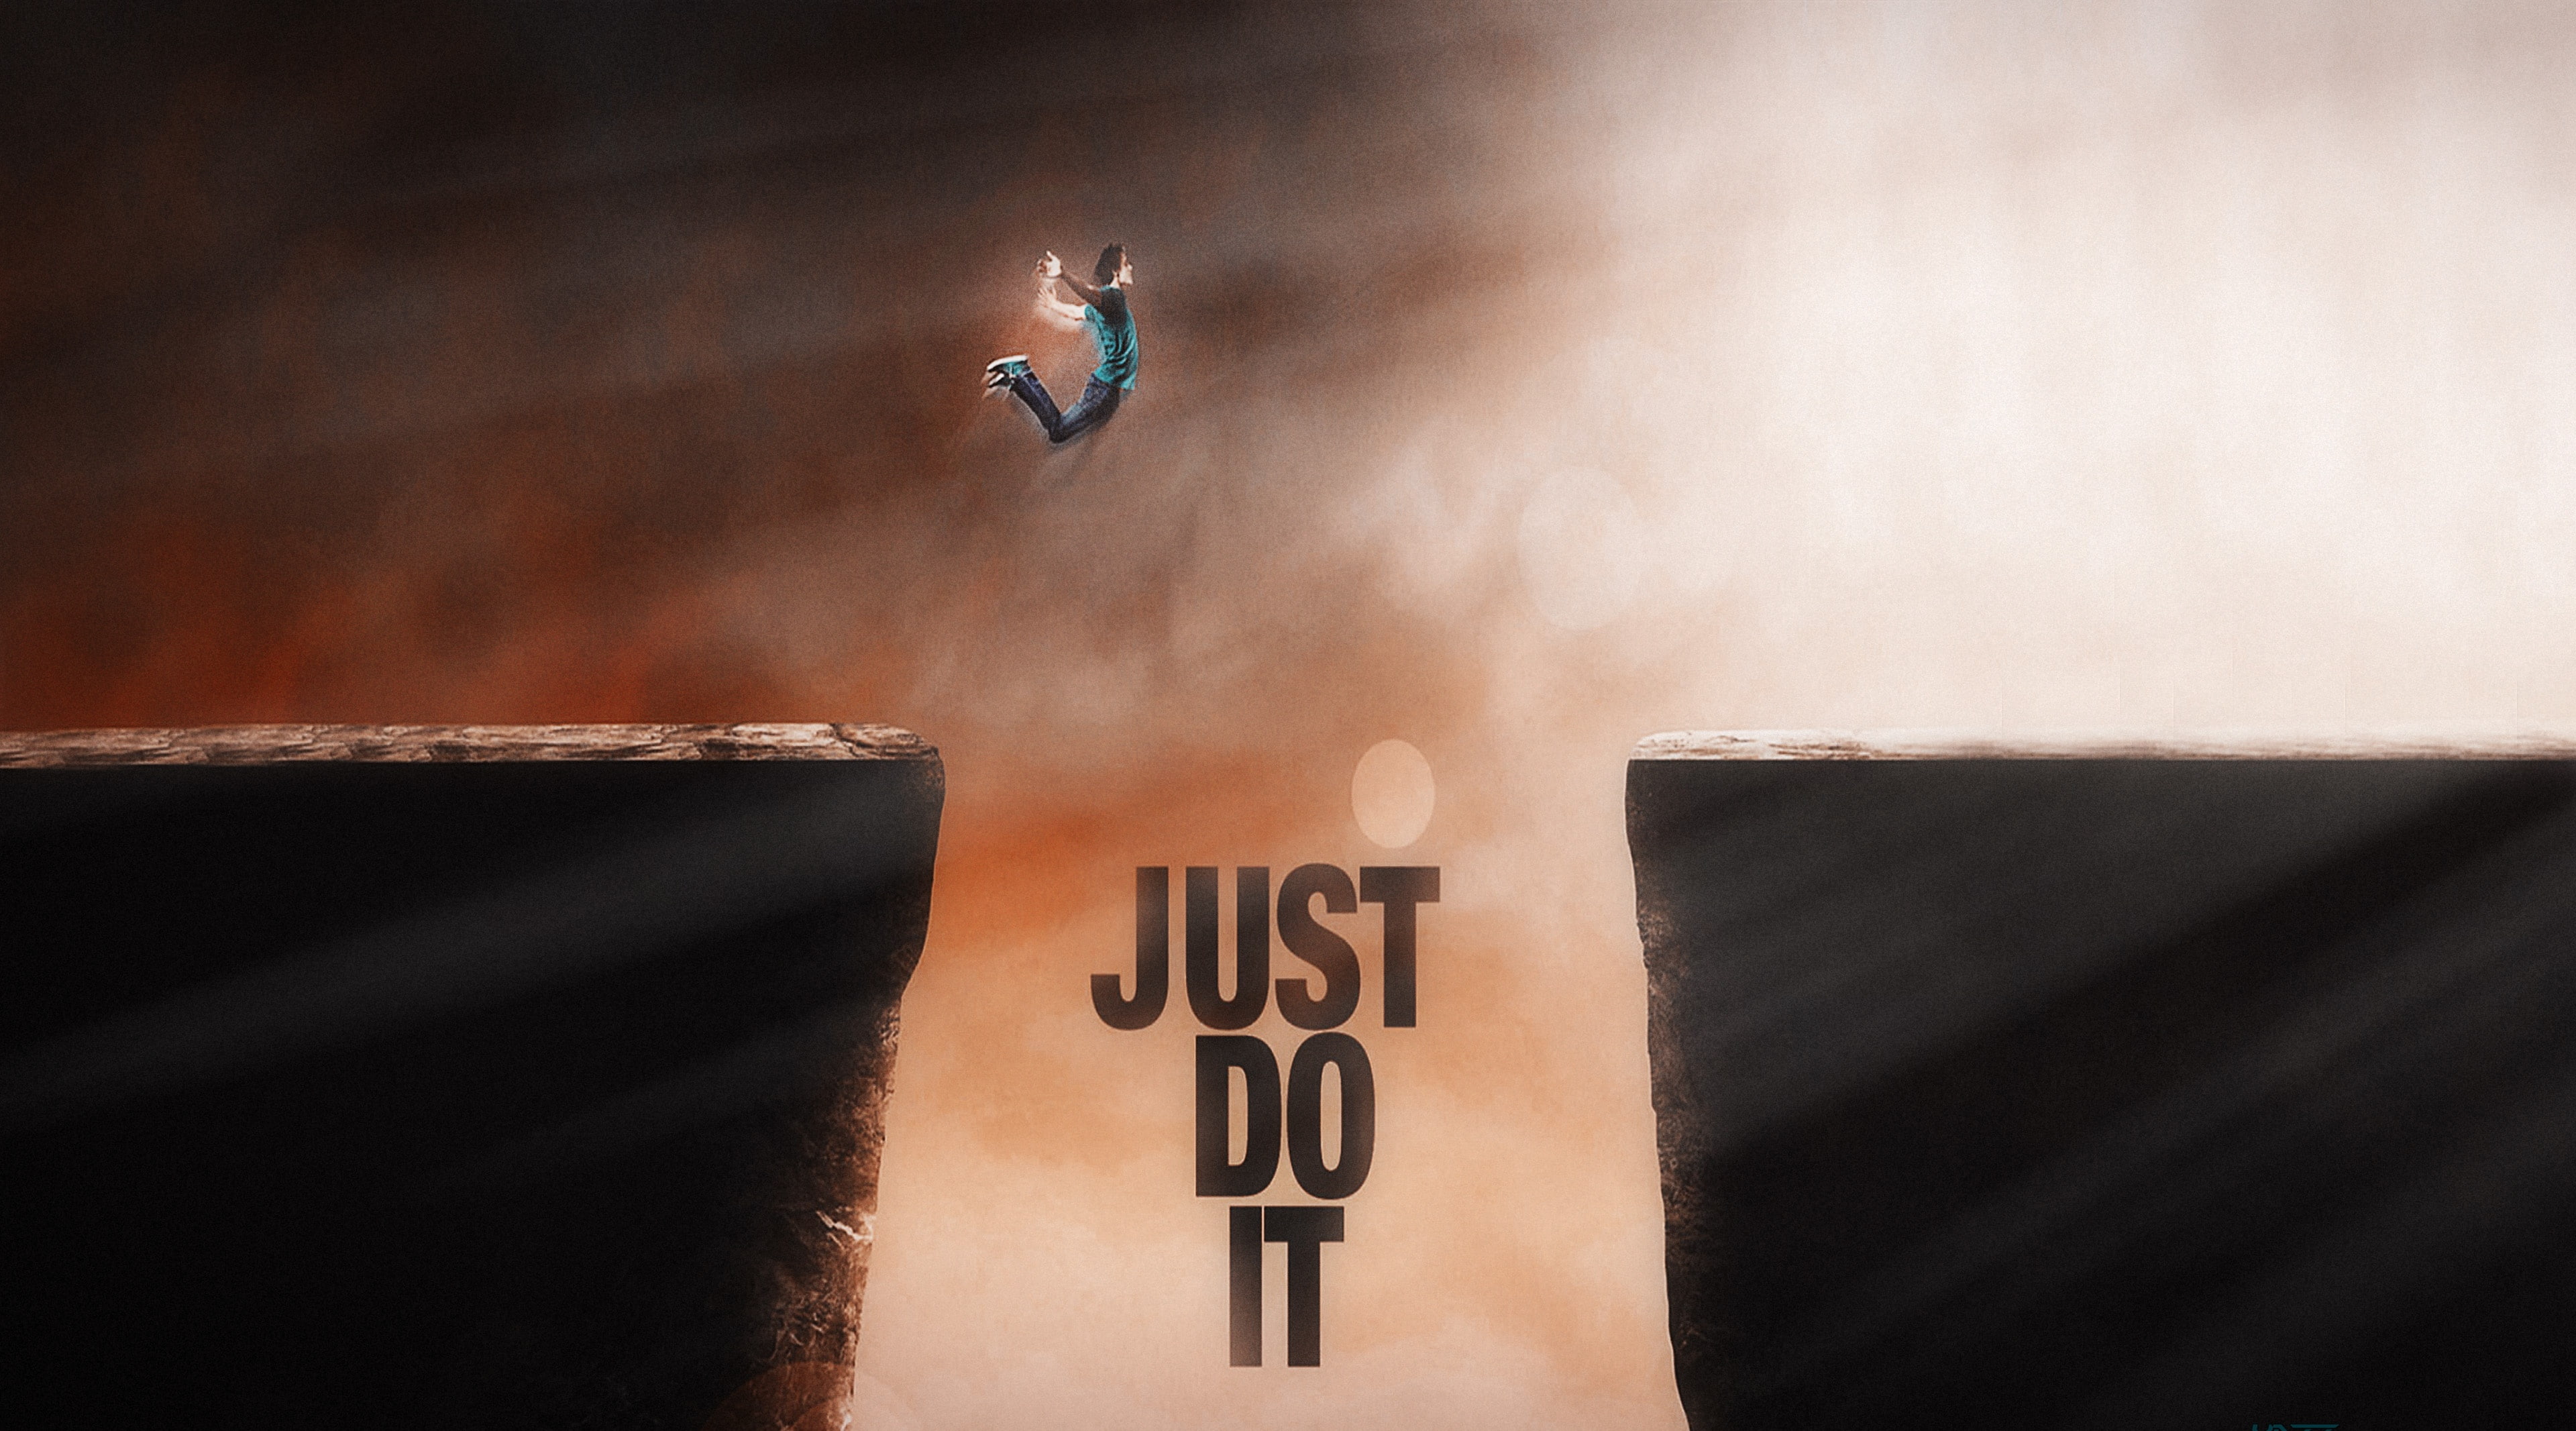 Just Do It, man jumping the gap with just do it digital text overlay digital wallpaper